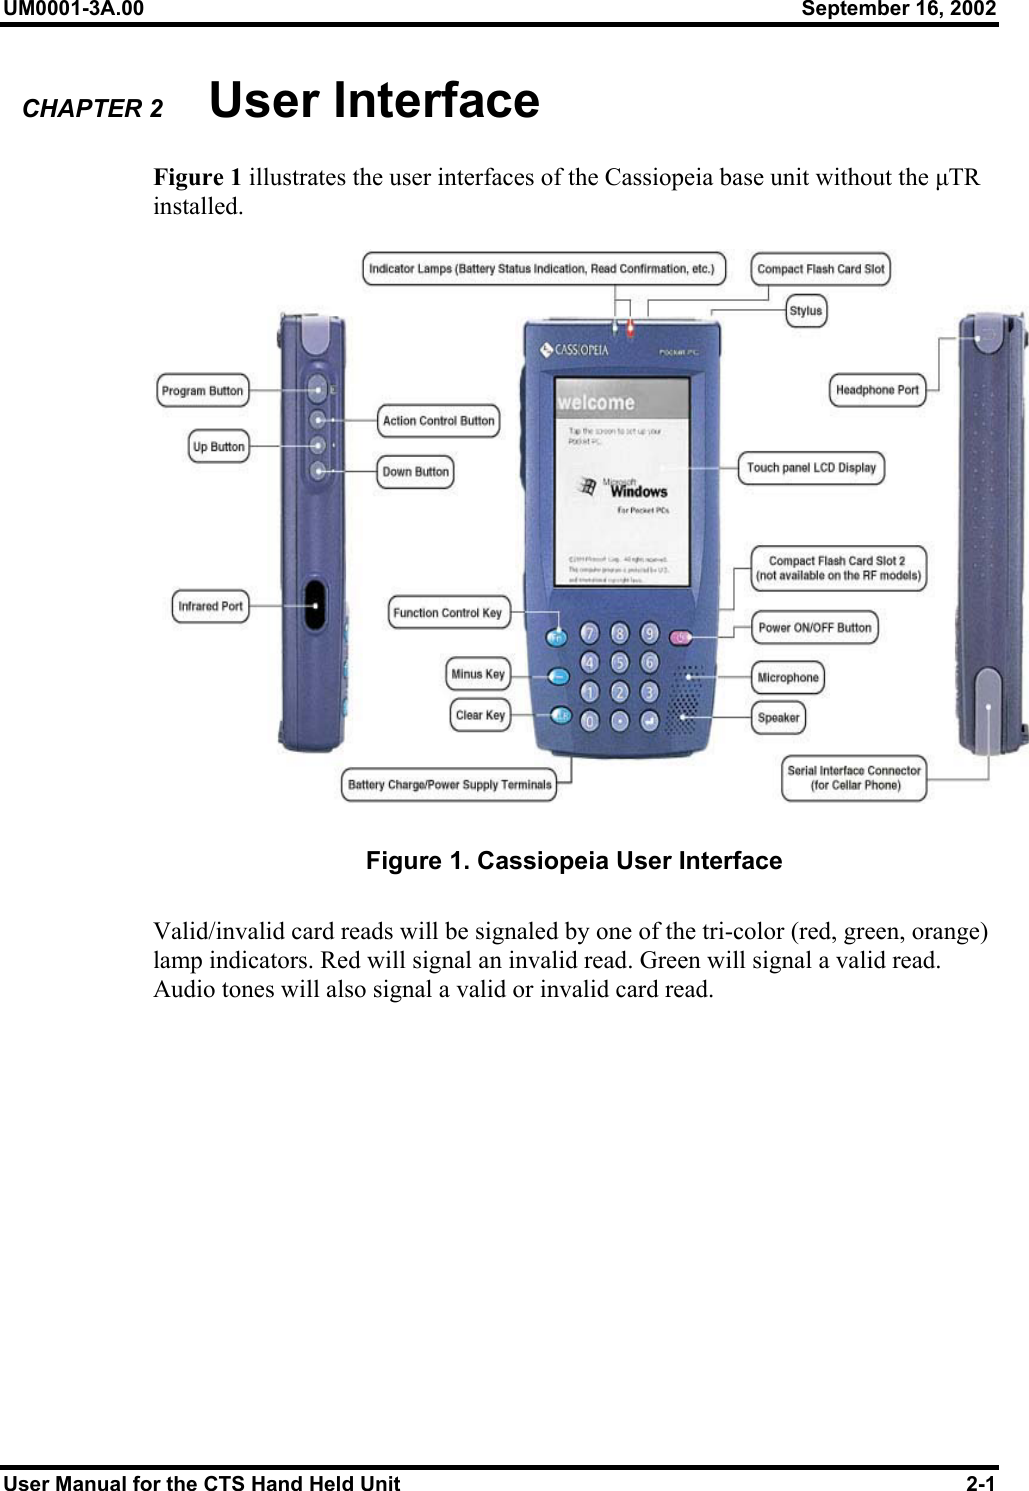 UM0001-3A.00  September 16, 2002 User Manual for the CTS Hand Held Unit  2-1 CHAPTER 2       User Interface Figure 1 illustrates the user interfaces of the Cassiopeia base unit without the µTR installed.    Figure 1. Cassiopeia User Interface  Valid/invalid card reads will be signaled by one of the tri-color (red, green, orange) lamp indicators. Red will signal an invalid read. Green will signal a valid read. Audio tones will also signal a valid or invalid card read.    